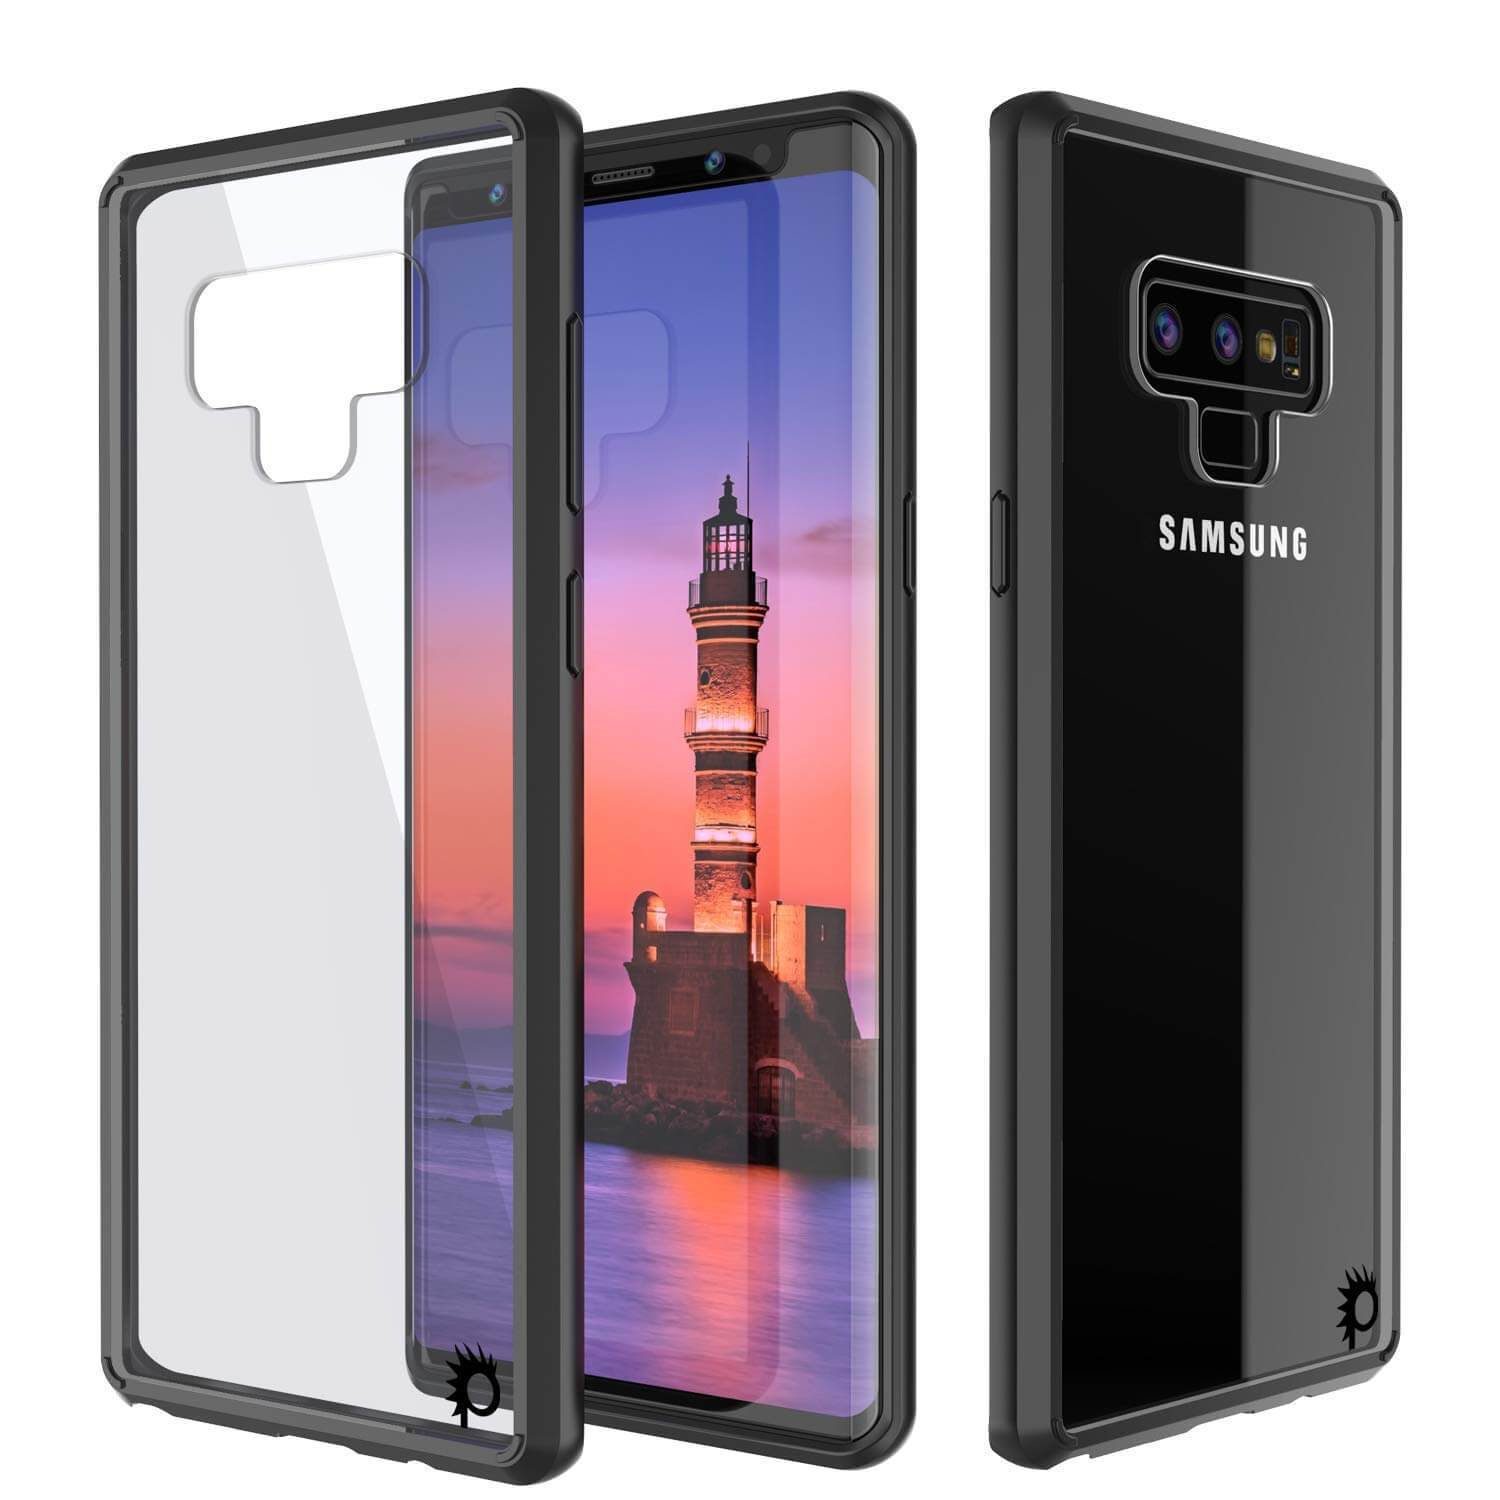 Galaxy Note 9 Case, PUNKcase [LUCID 2.0 Series] [Slim Fit] Armor Cover W/Integrated Anti-Shock System [Black] - PunkCase NZ